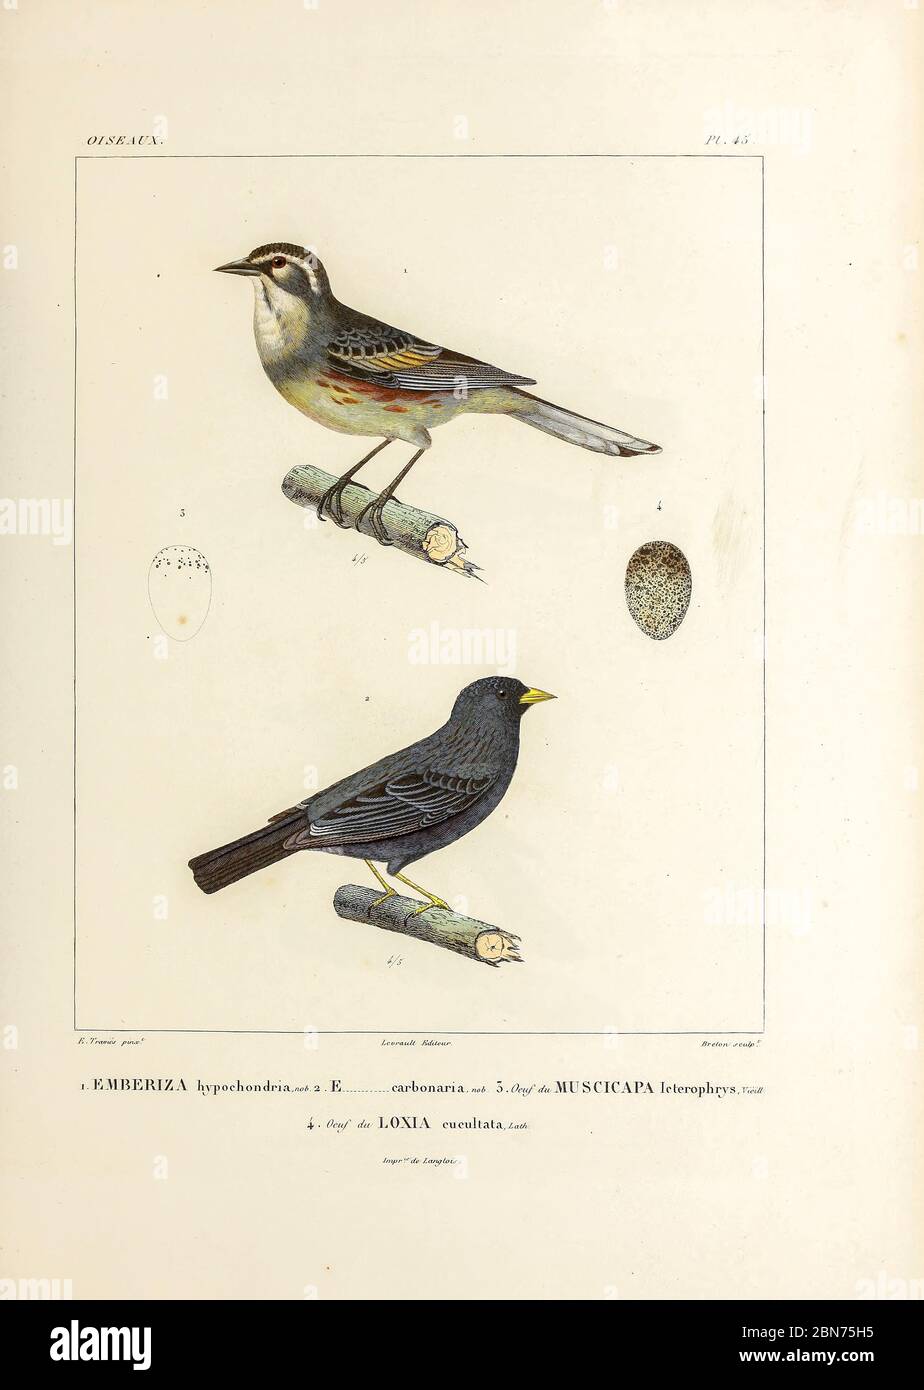 hand coloured sketch Top: rufous-sided warbling finch (Poospiza hypochondria [Here as Emberiza hypochondria]) Bottom: carbonated sierra finch (Phrygilus carbonarius [Here as Emberiza carbonaria]) From the book 'Voyage dans l'Amérique Méridionale' [Journey to South America: (Brazil, the eastern republic of Uruguay, the Argentine Republic, Patagonia, the republic of Chile, the republic of Bolivia, the republic of Peru), executed during the years 1826 - 1833] 4th volume Part 3 By: Orbigny, Alcide Dessalines d', d'Orbigny, 1802-1857; Montagne, Jean François Camille, 1784-1866; Martius, Karl Fried Stock Photo